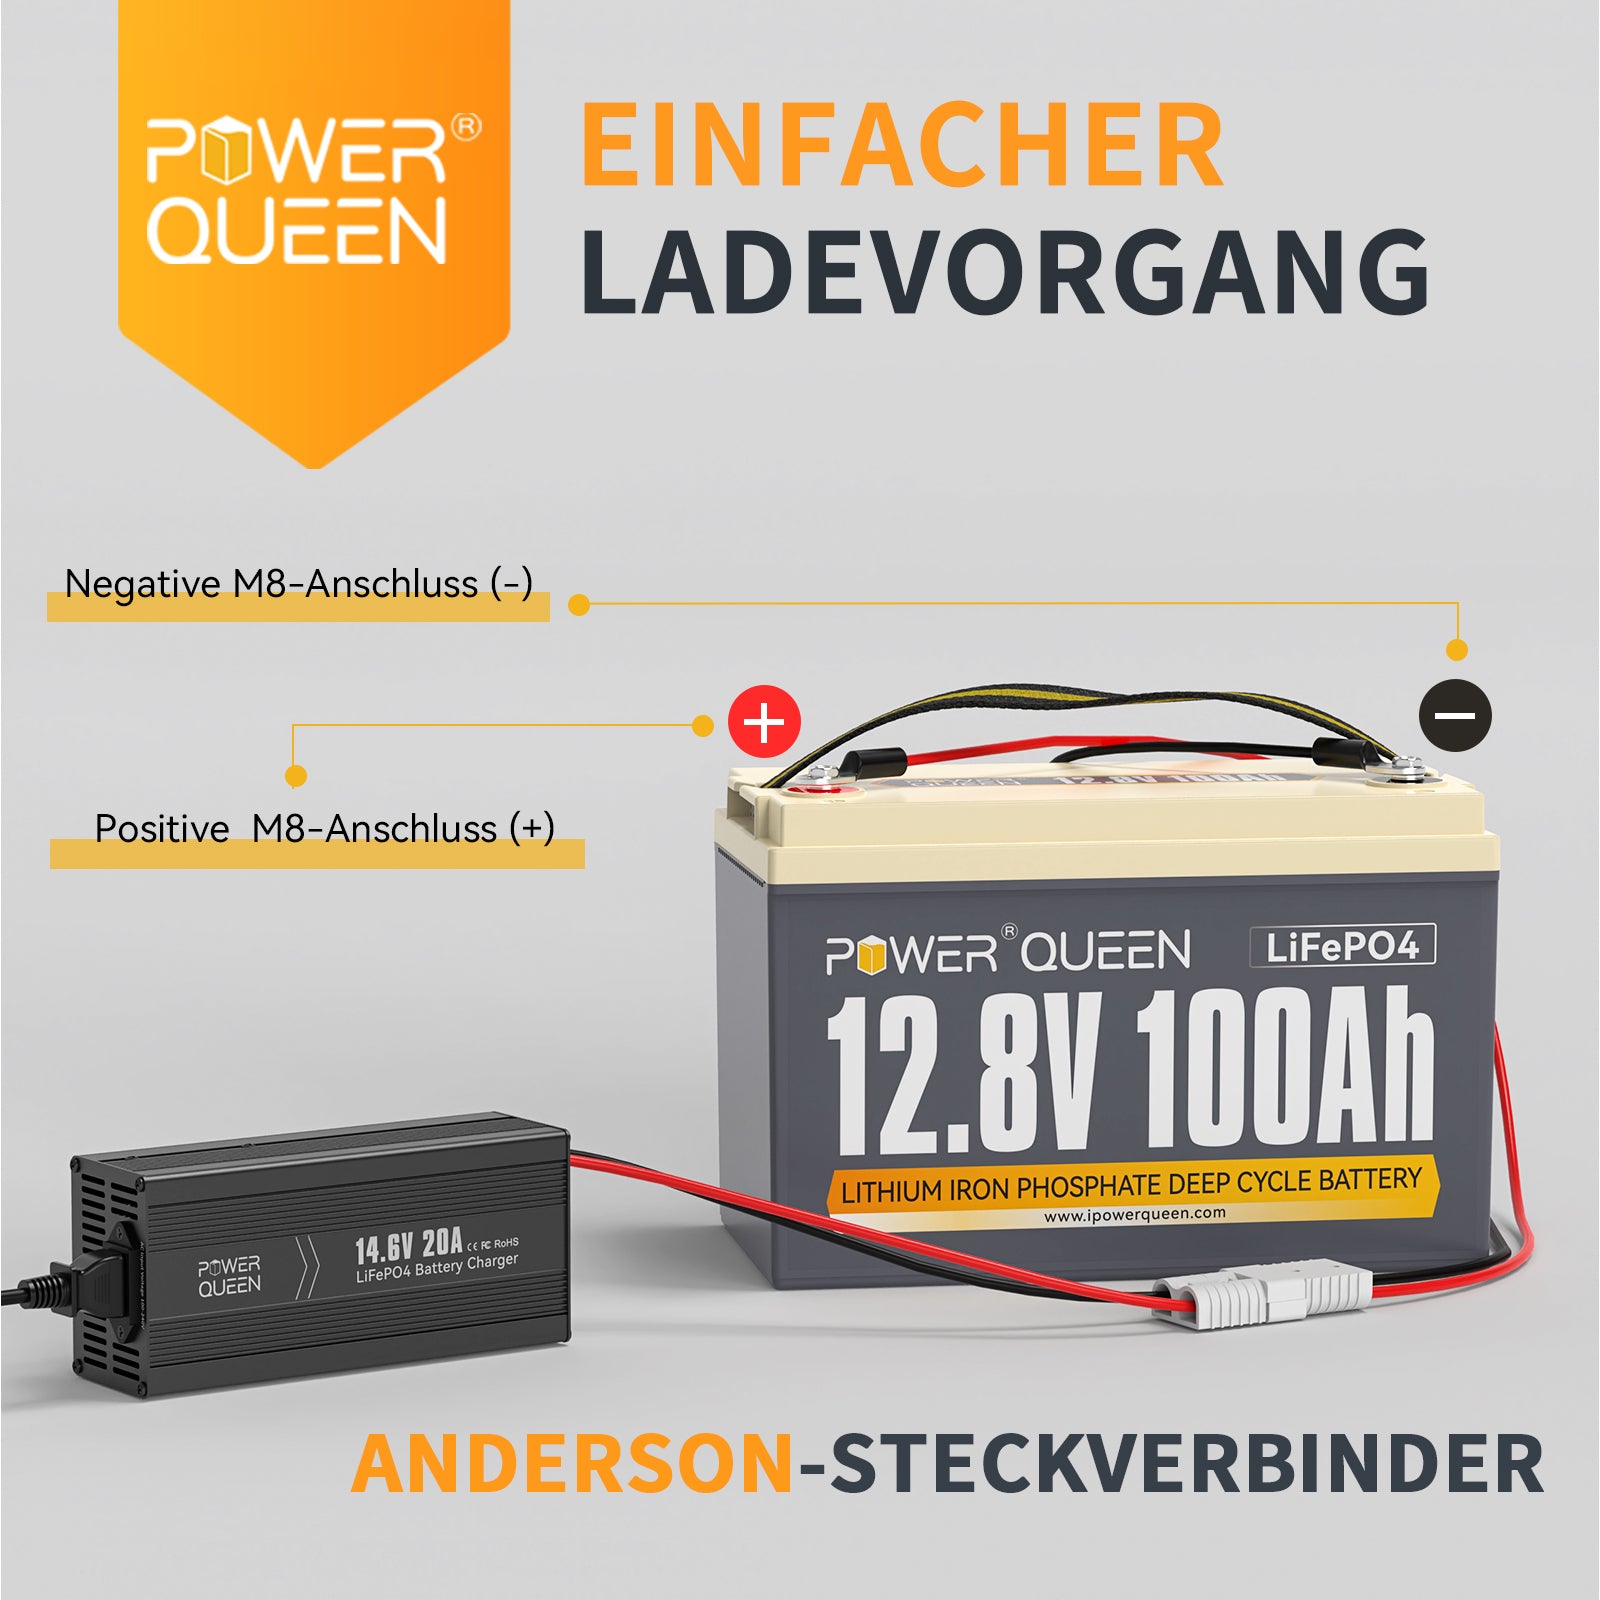 Power Queen 14,6V 20A LiFePO4 oplader voor 12V LiFePO4 accu